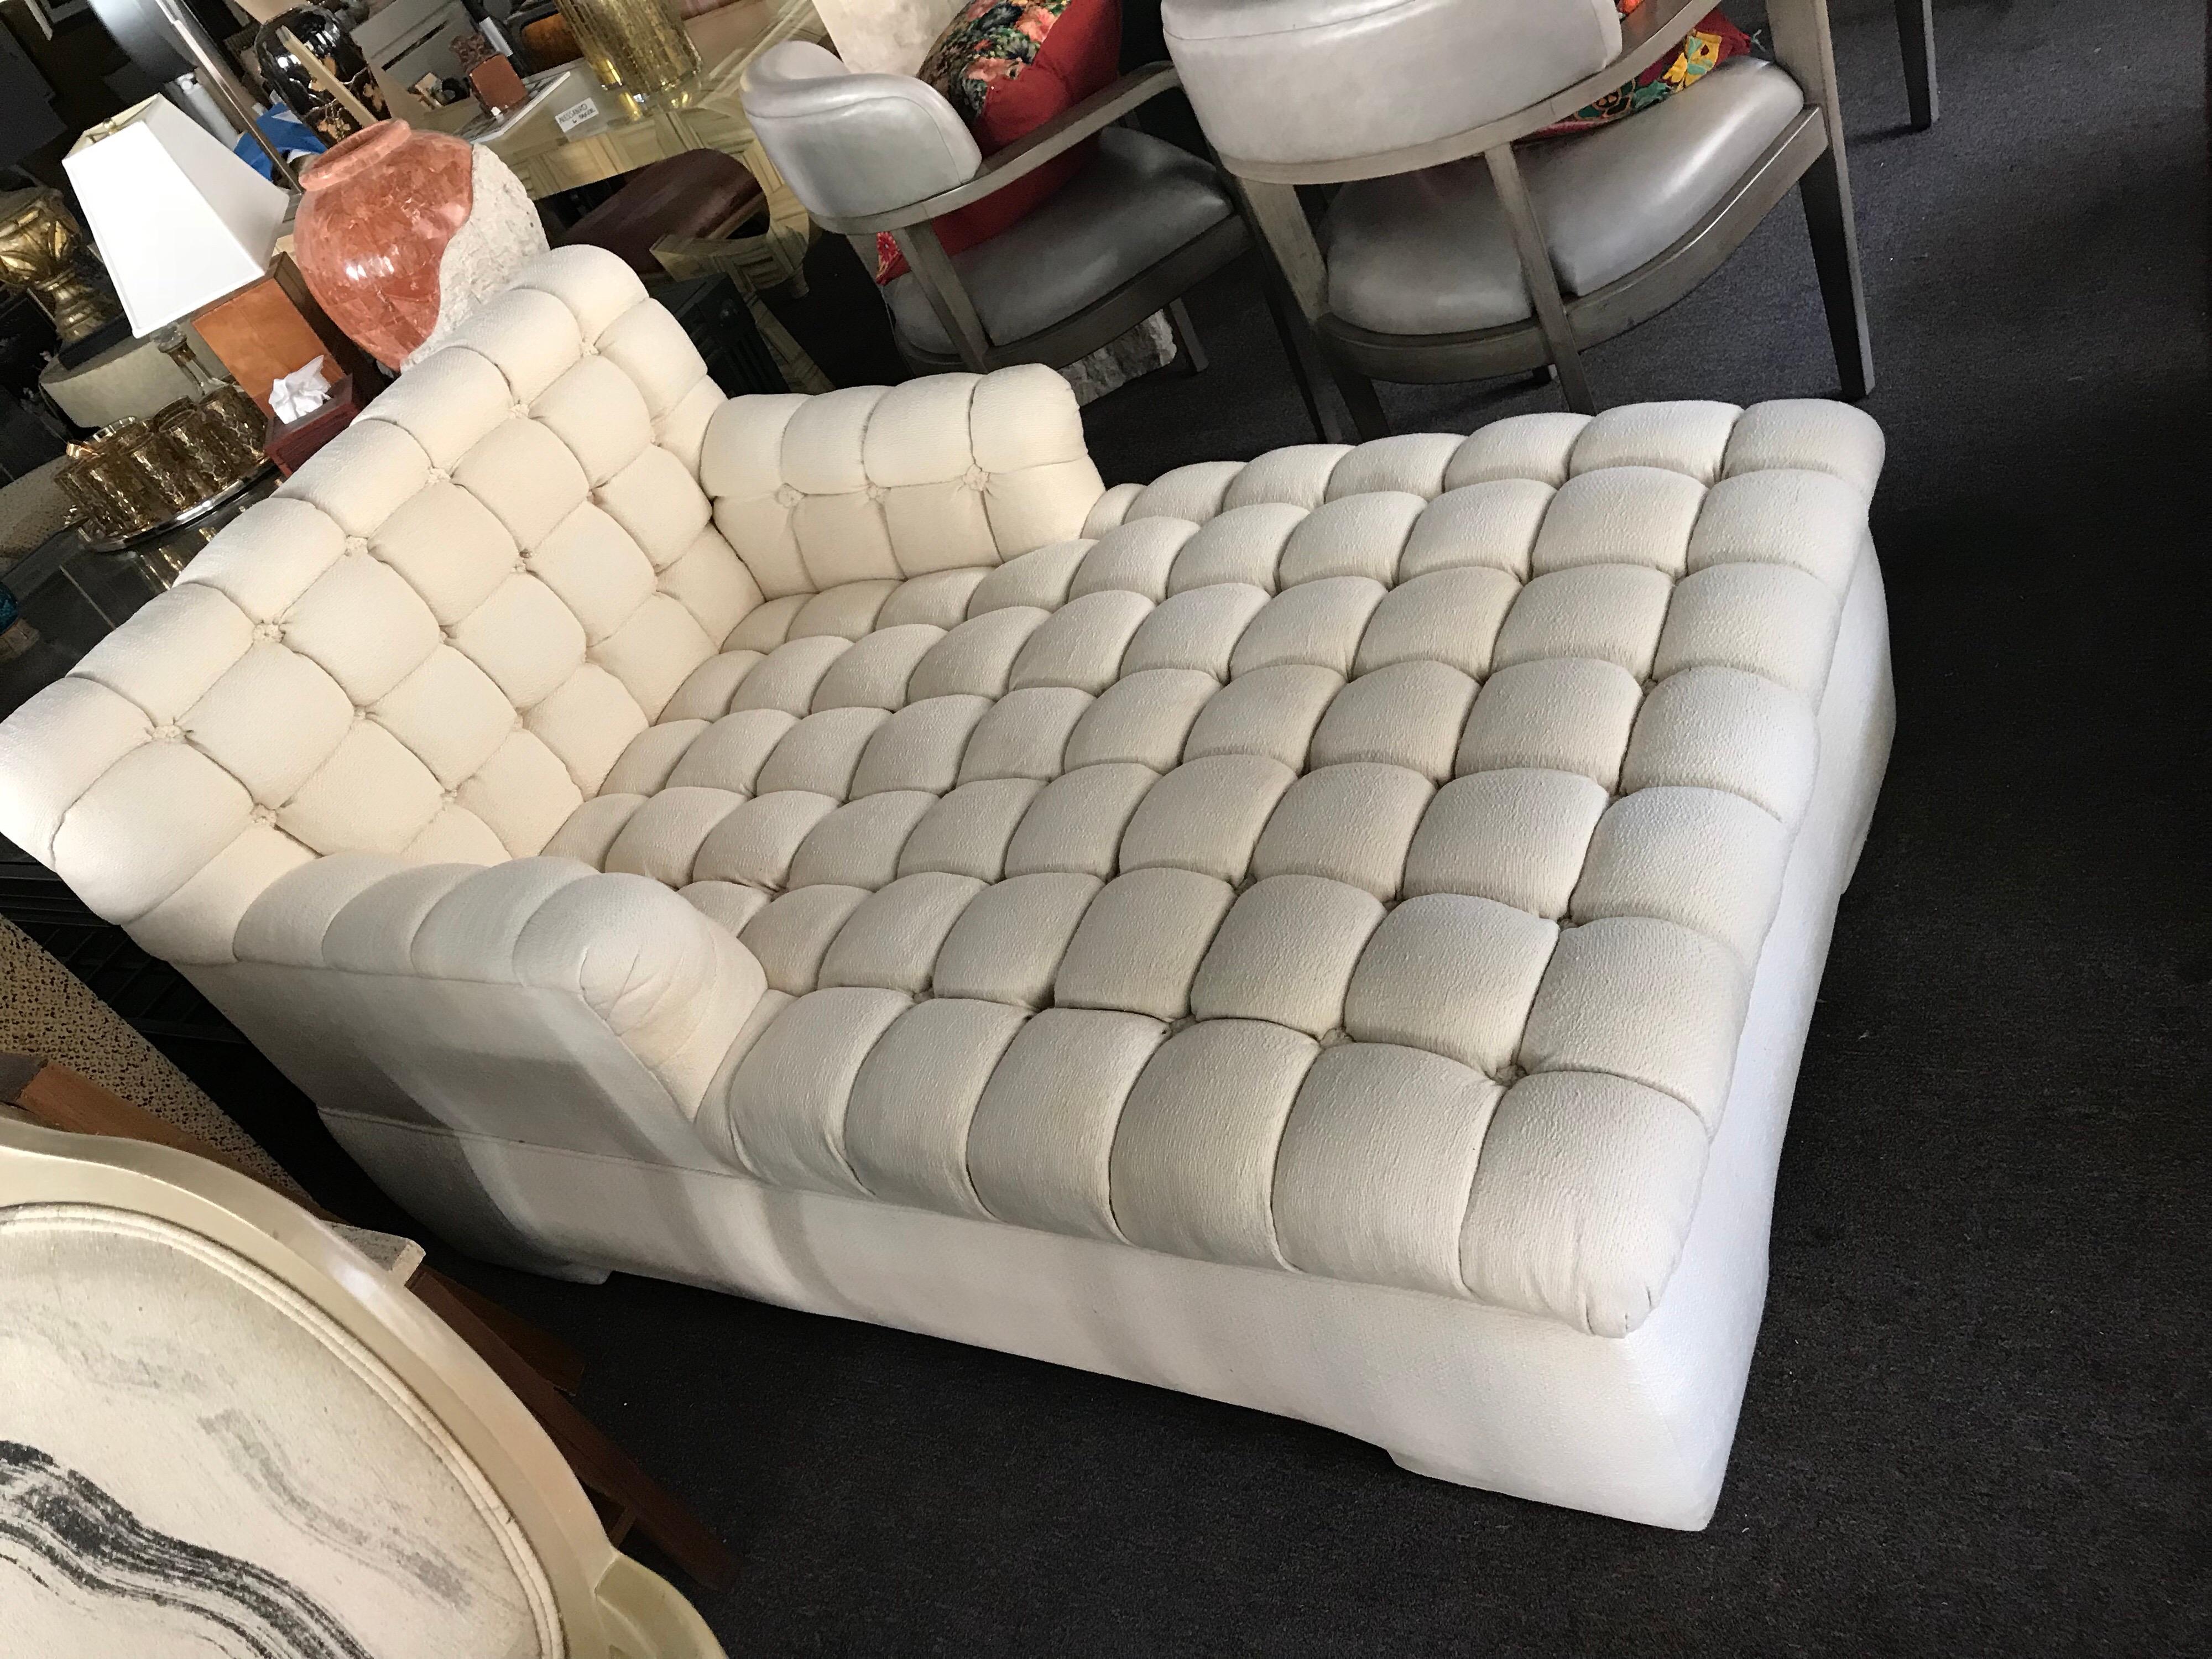 Rare Original Steve Chase Marshmallow Tufted Chaise Lounge Made by A. Rudin 3